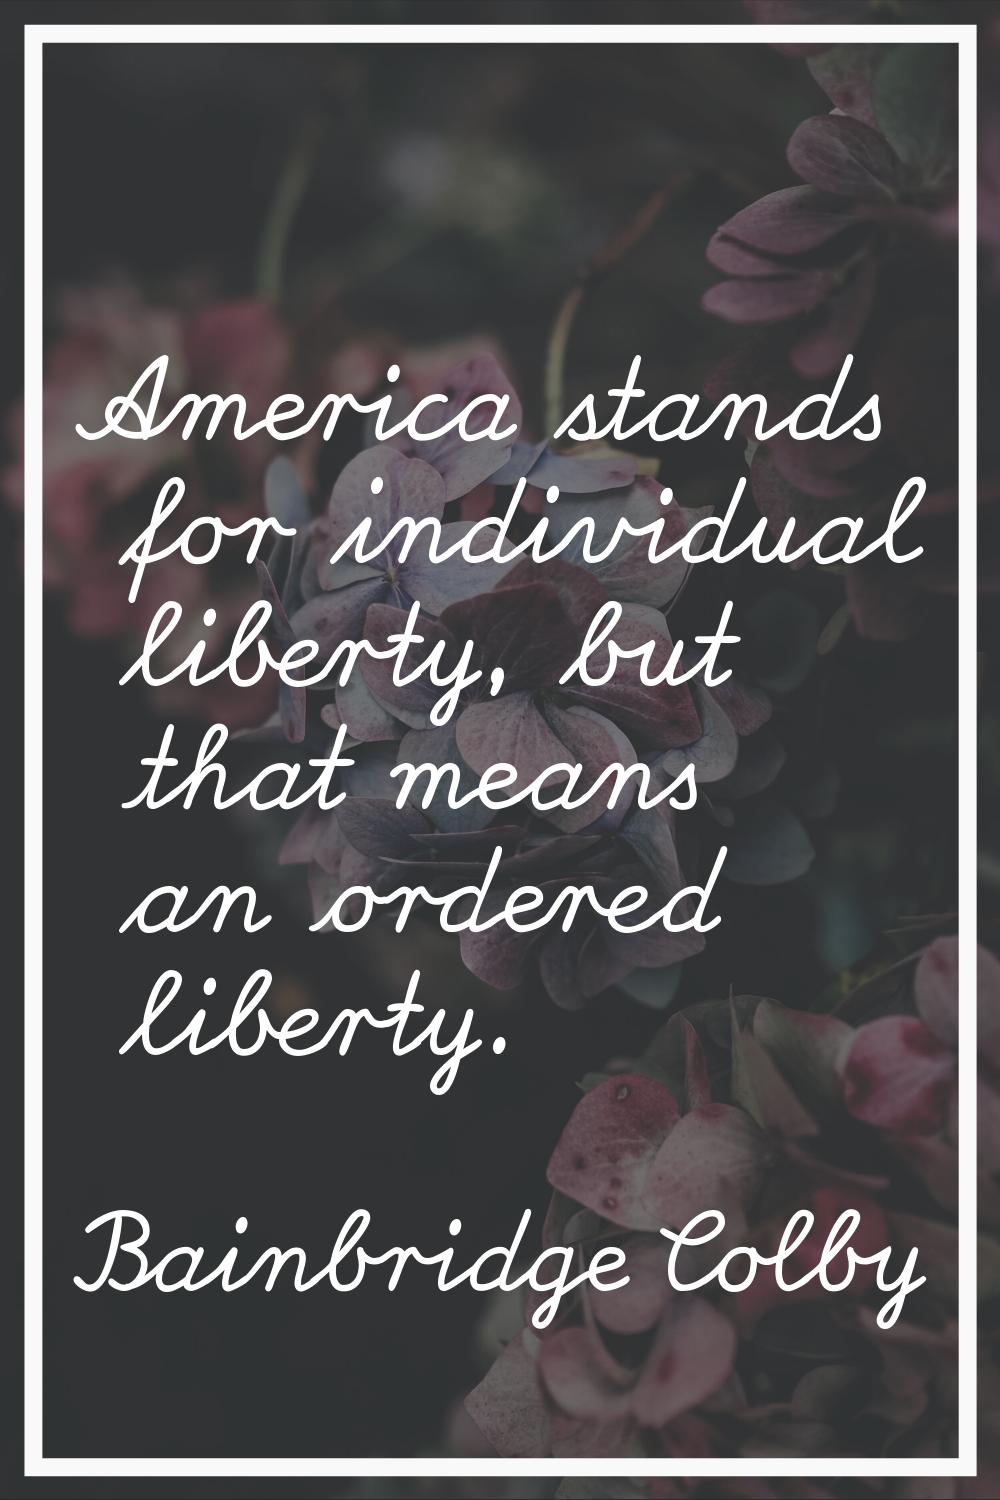 America stands for individual liberty, but that means an ordered liberty.